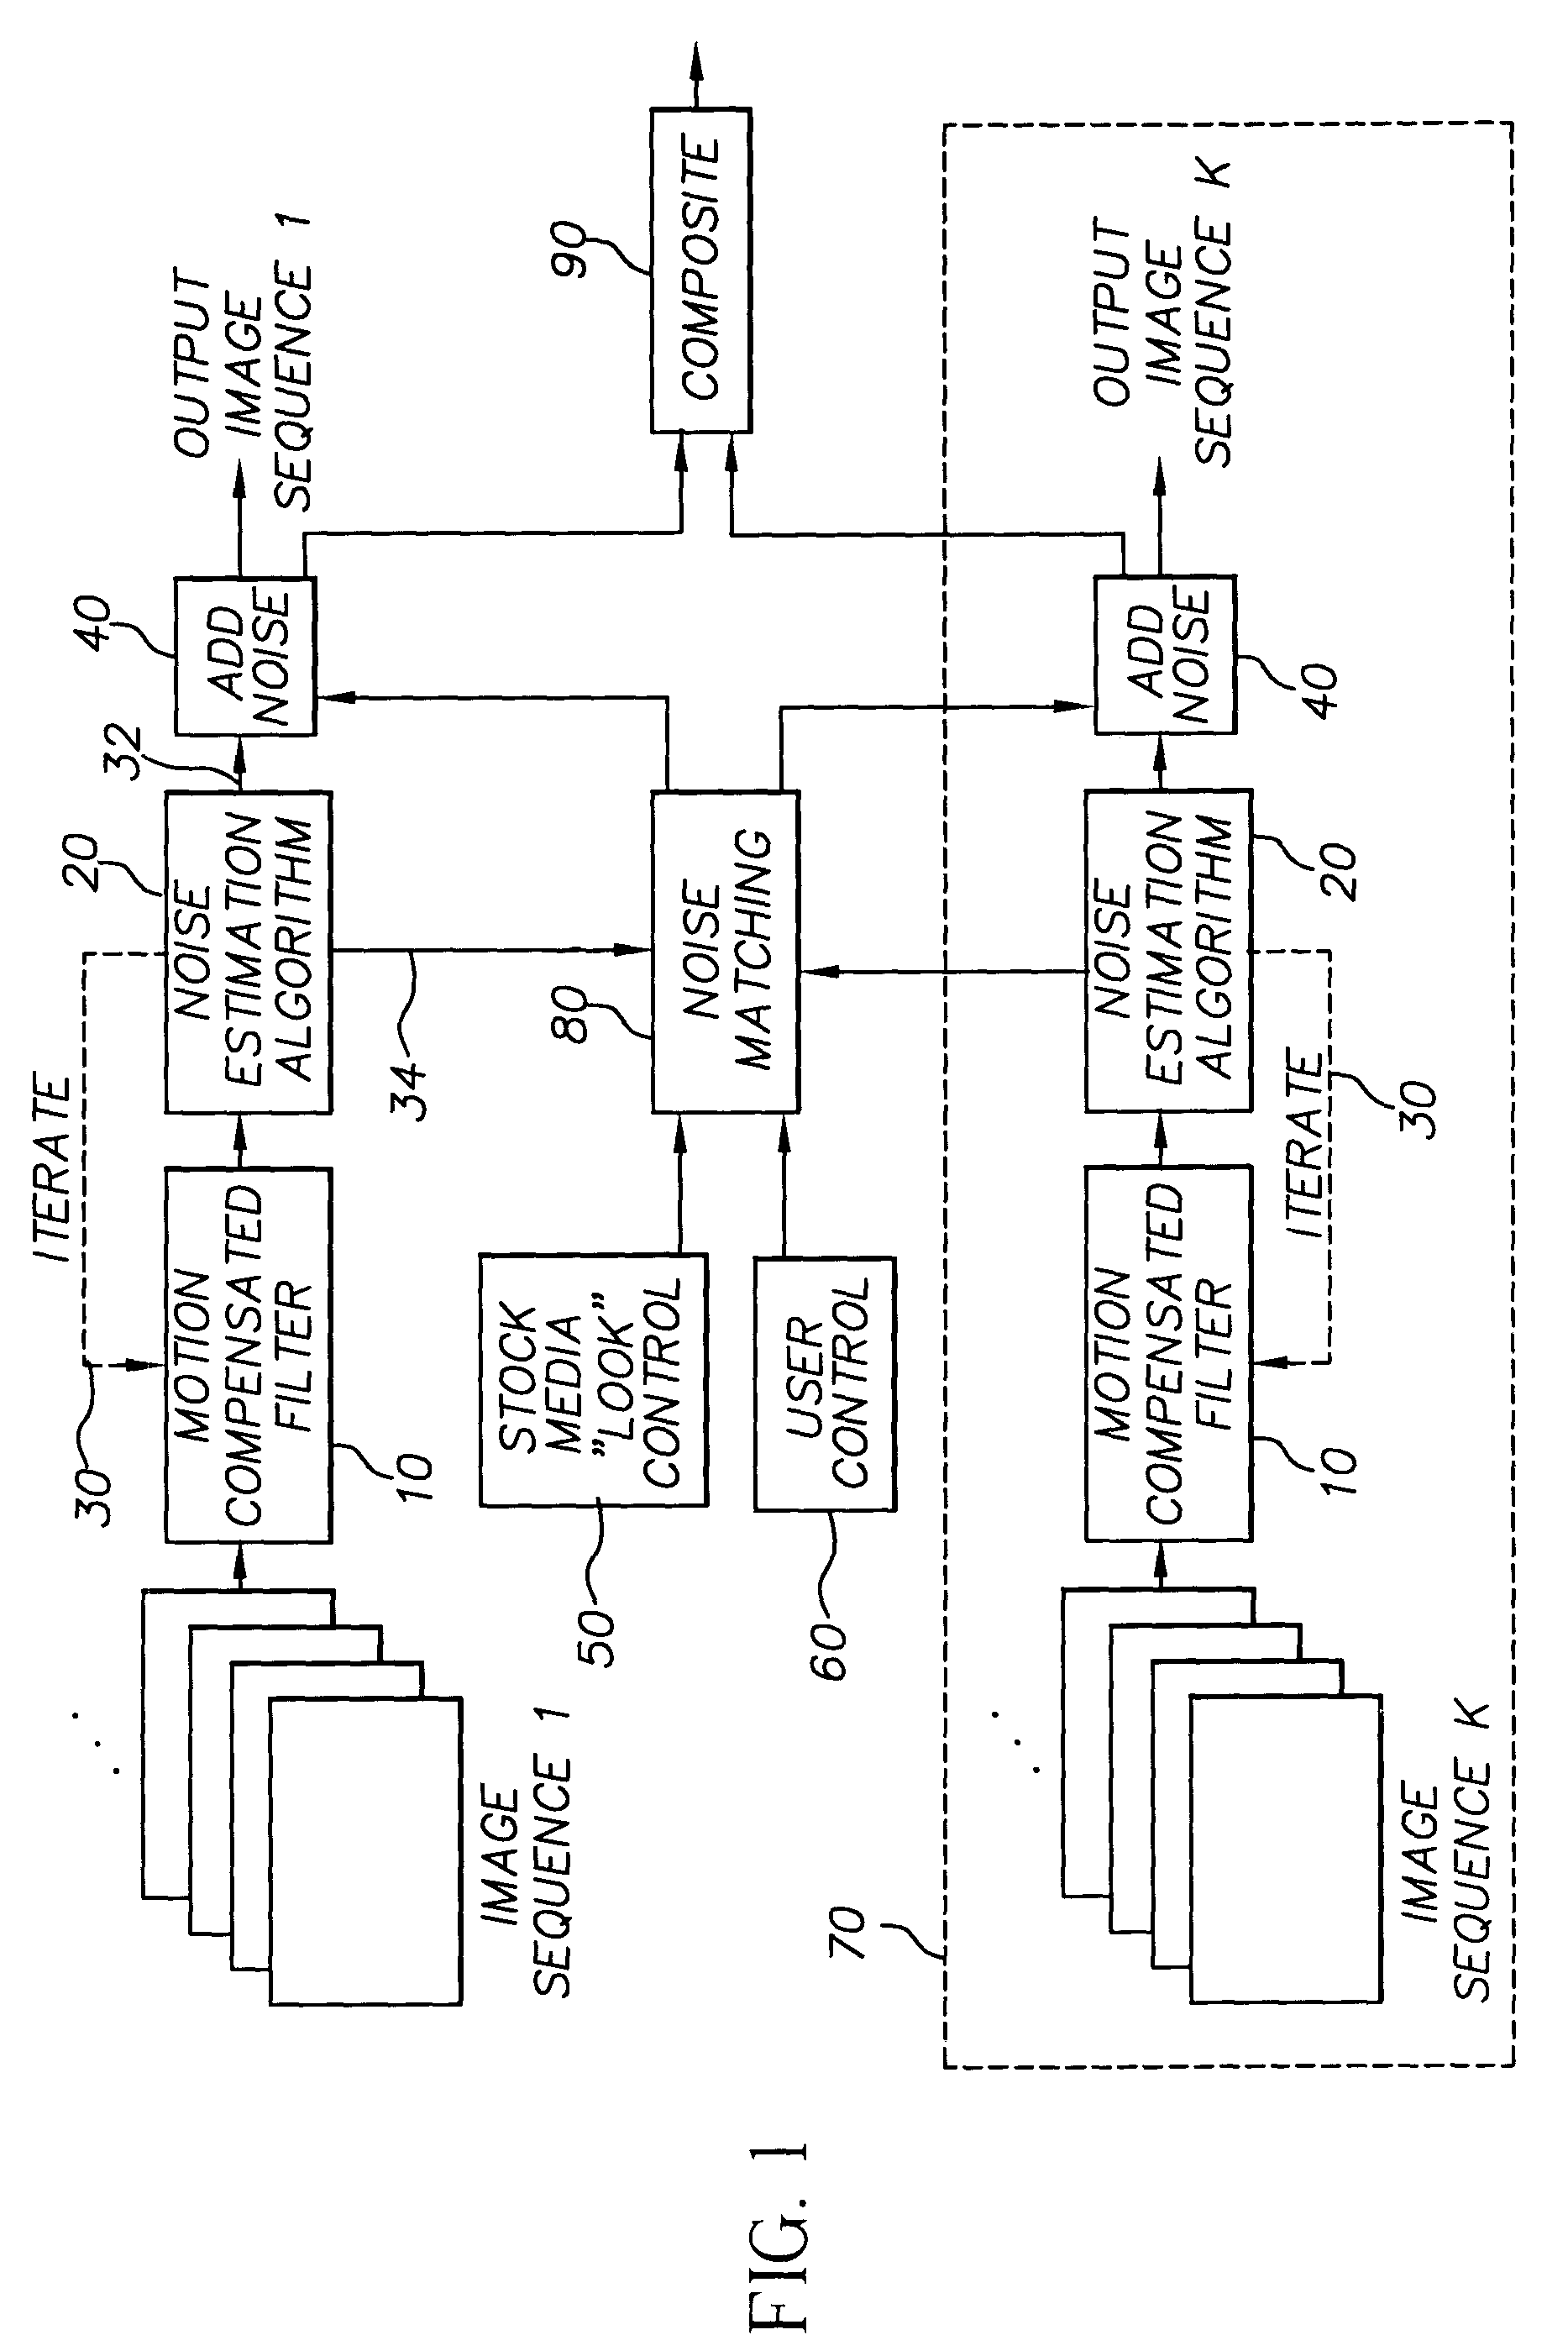 System and method for estimating, synthesizing and matching noise in digital images and image sequences